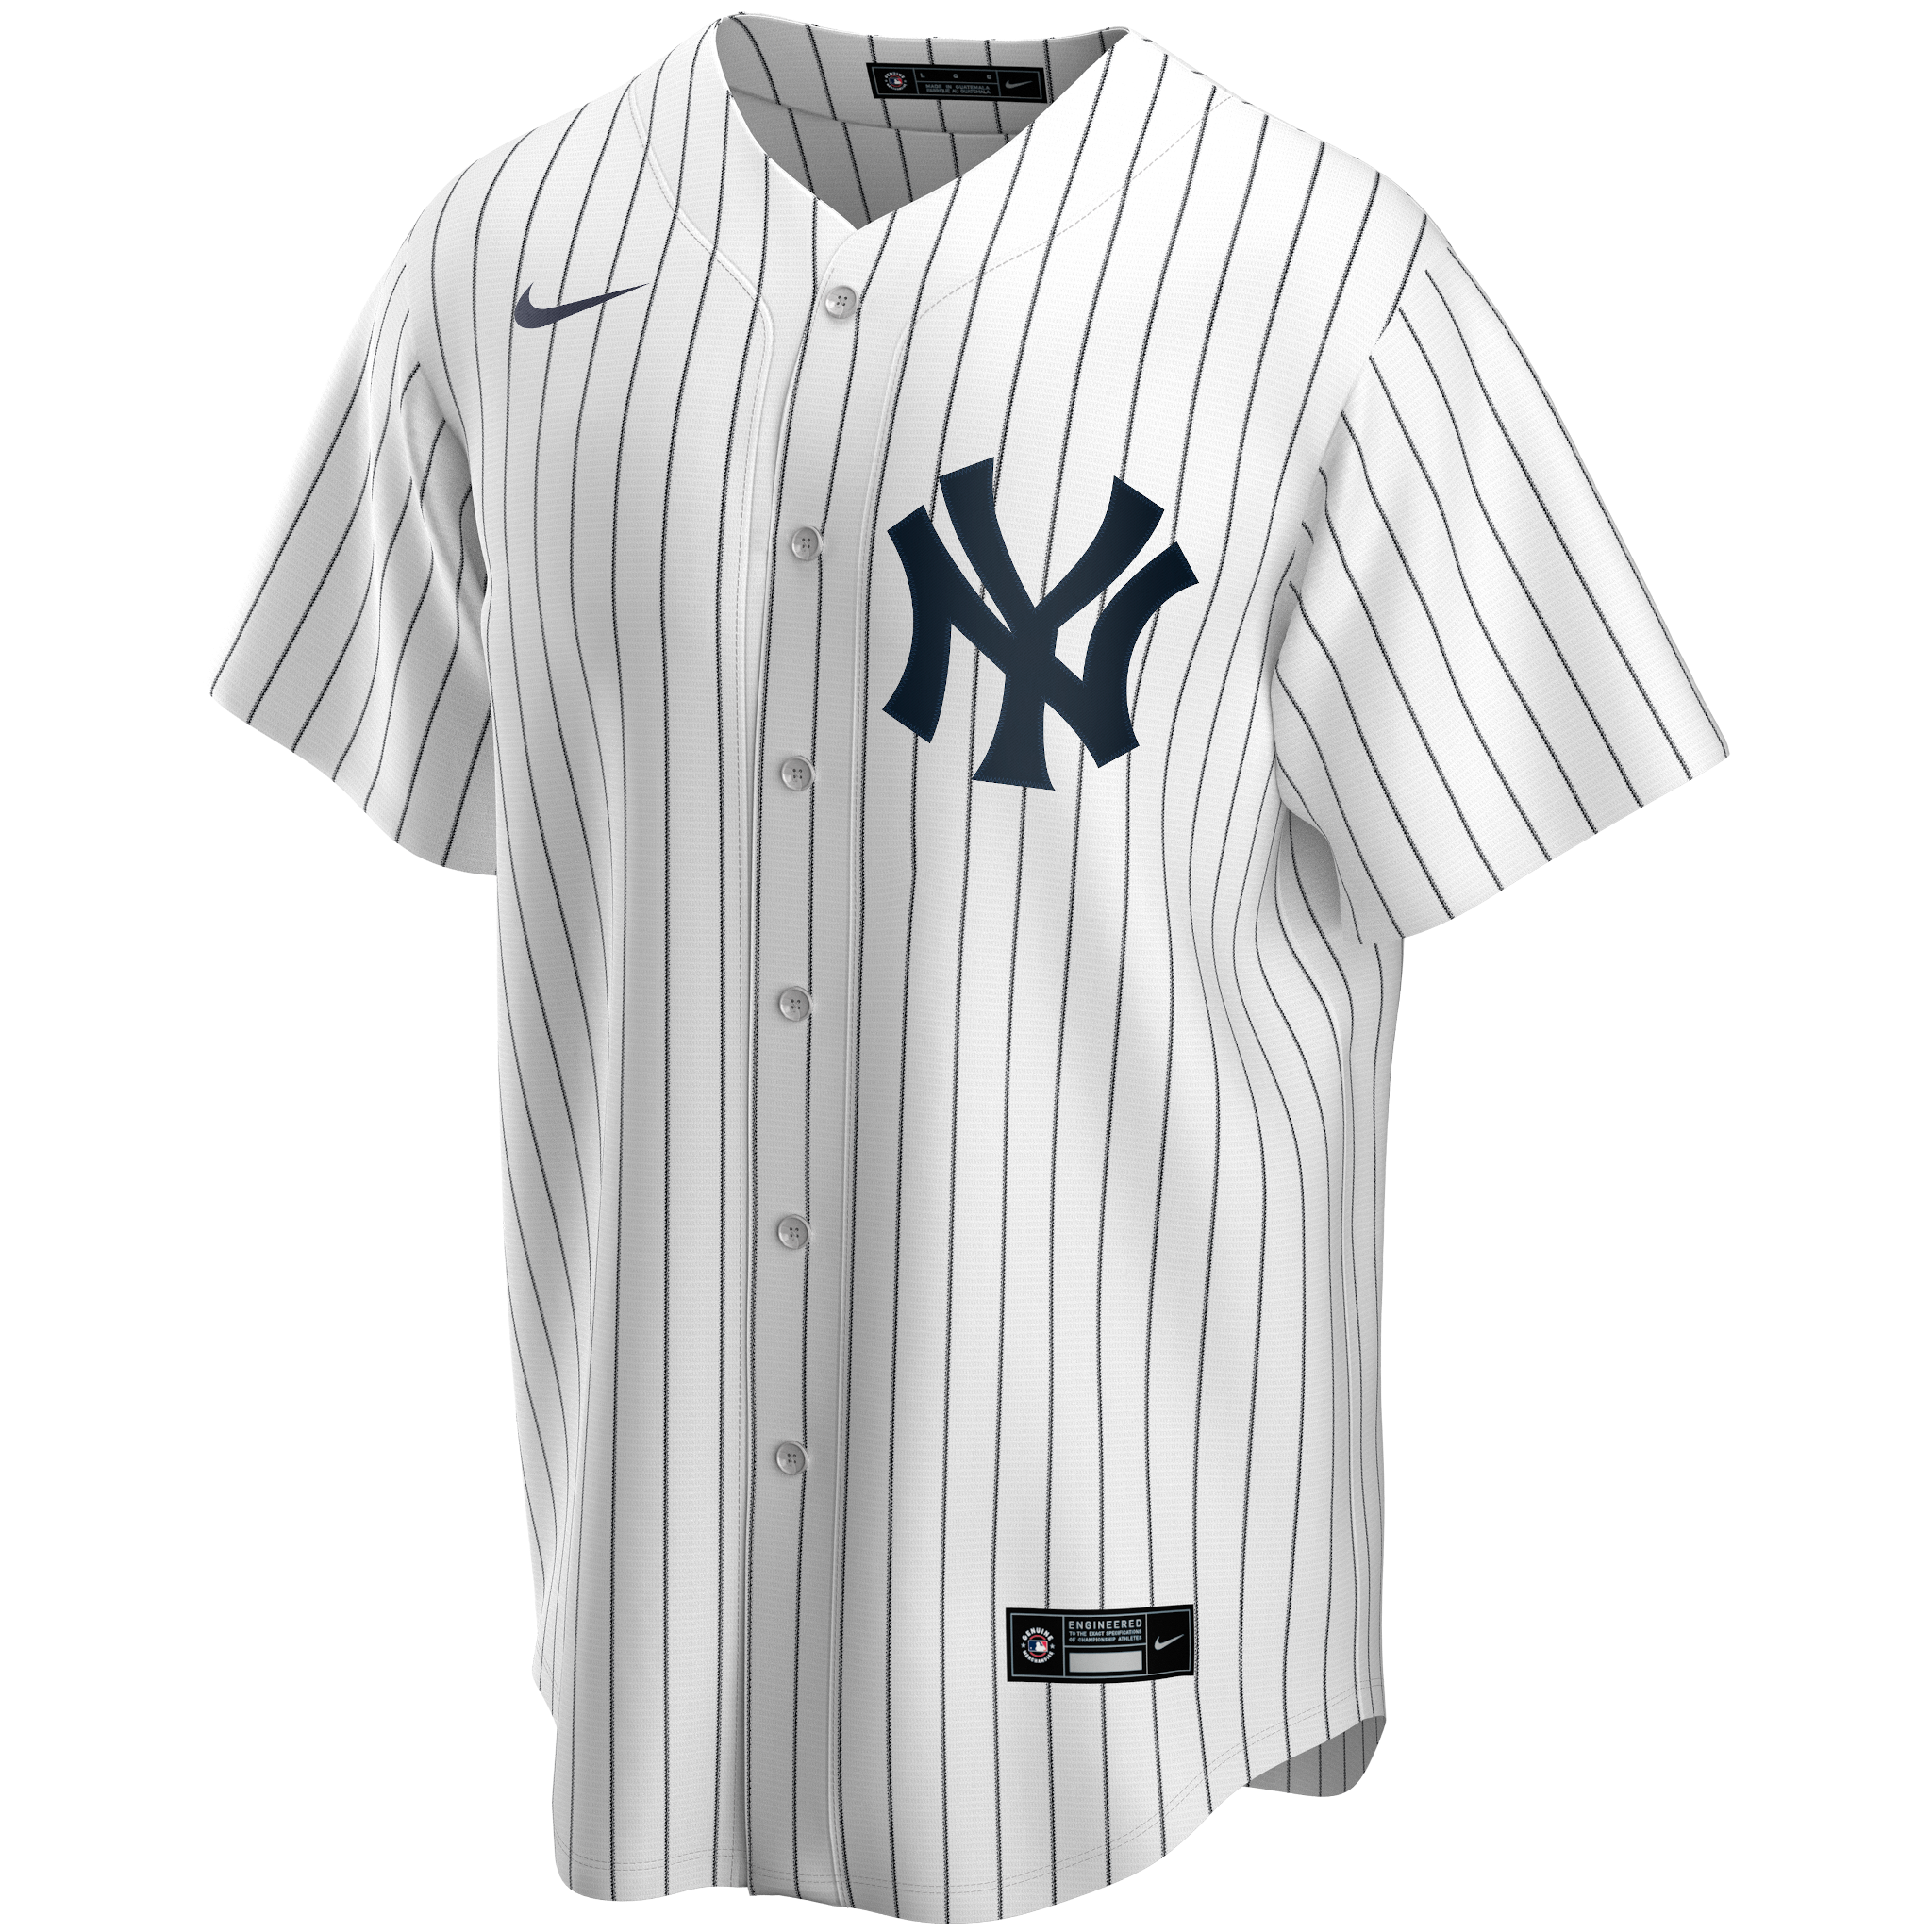 New York Yankees Jorge Posada Clemens #22 Authentic White Jersey Russell 52